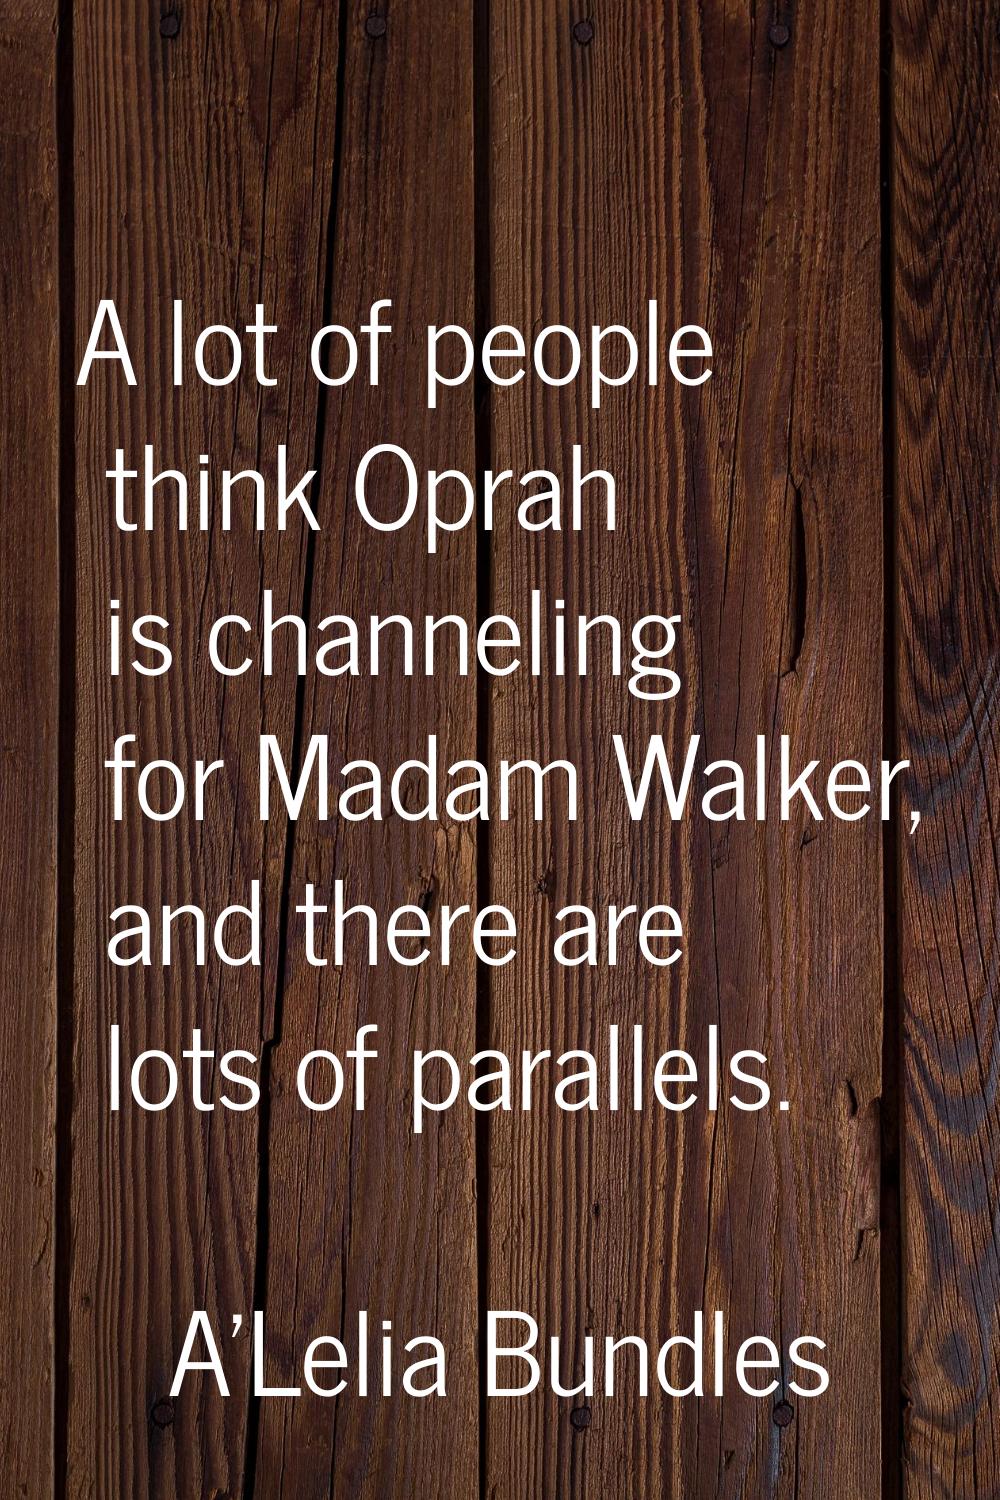 A lot of people think Oprah is channeling for Madam Walker, and there are lots of parallels.